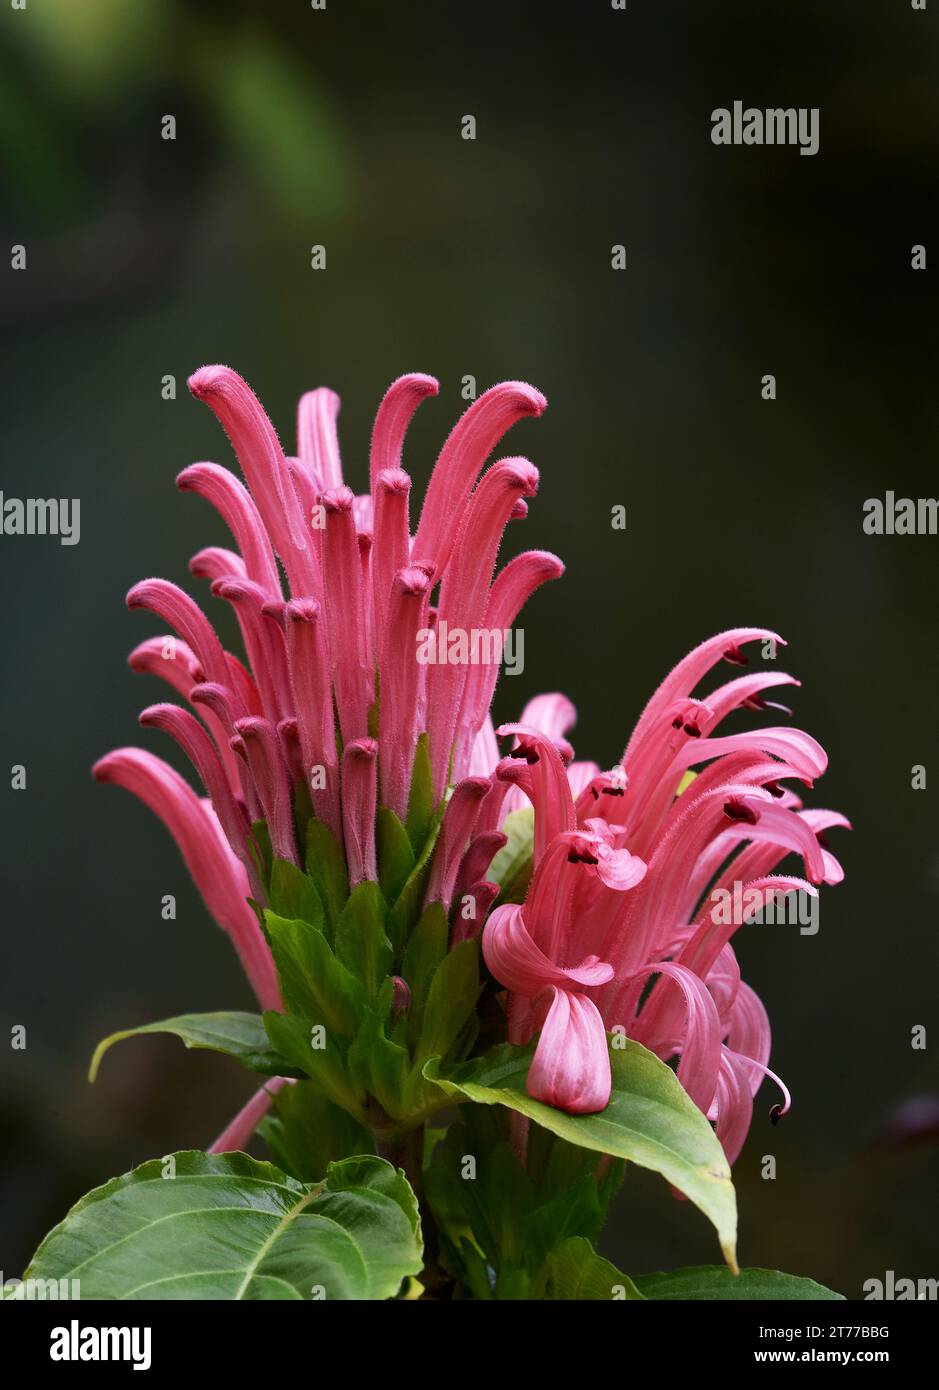 Single pink Justicia carnea, Brazilian plume flower, against a green background Stock Photo